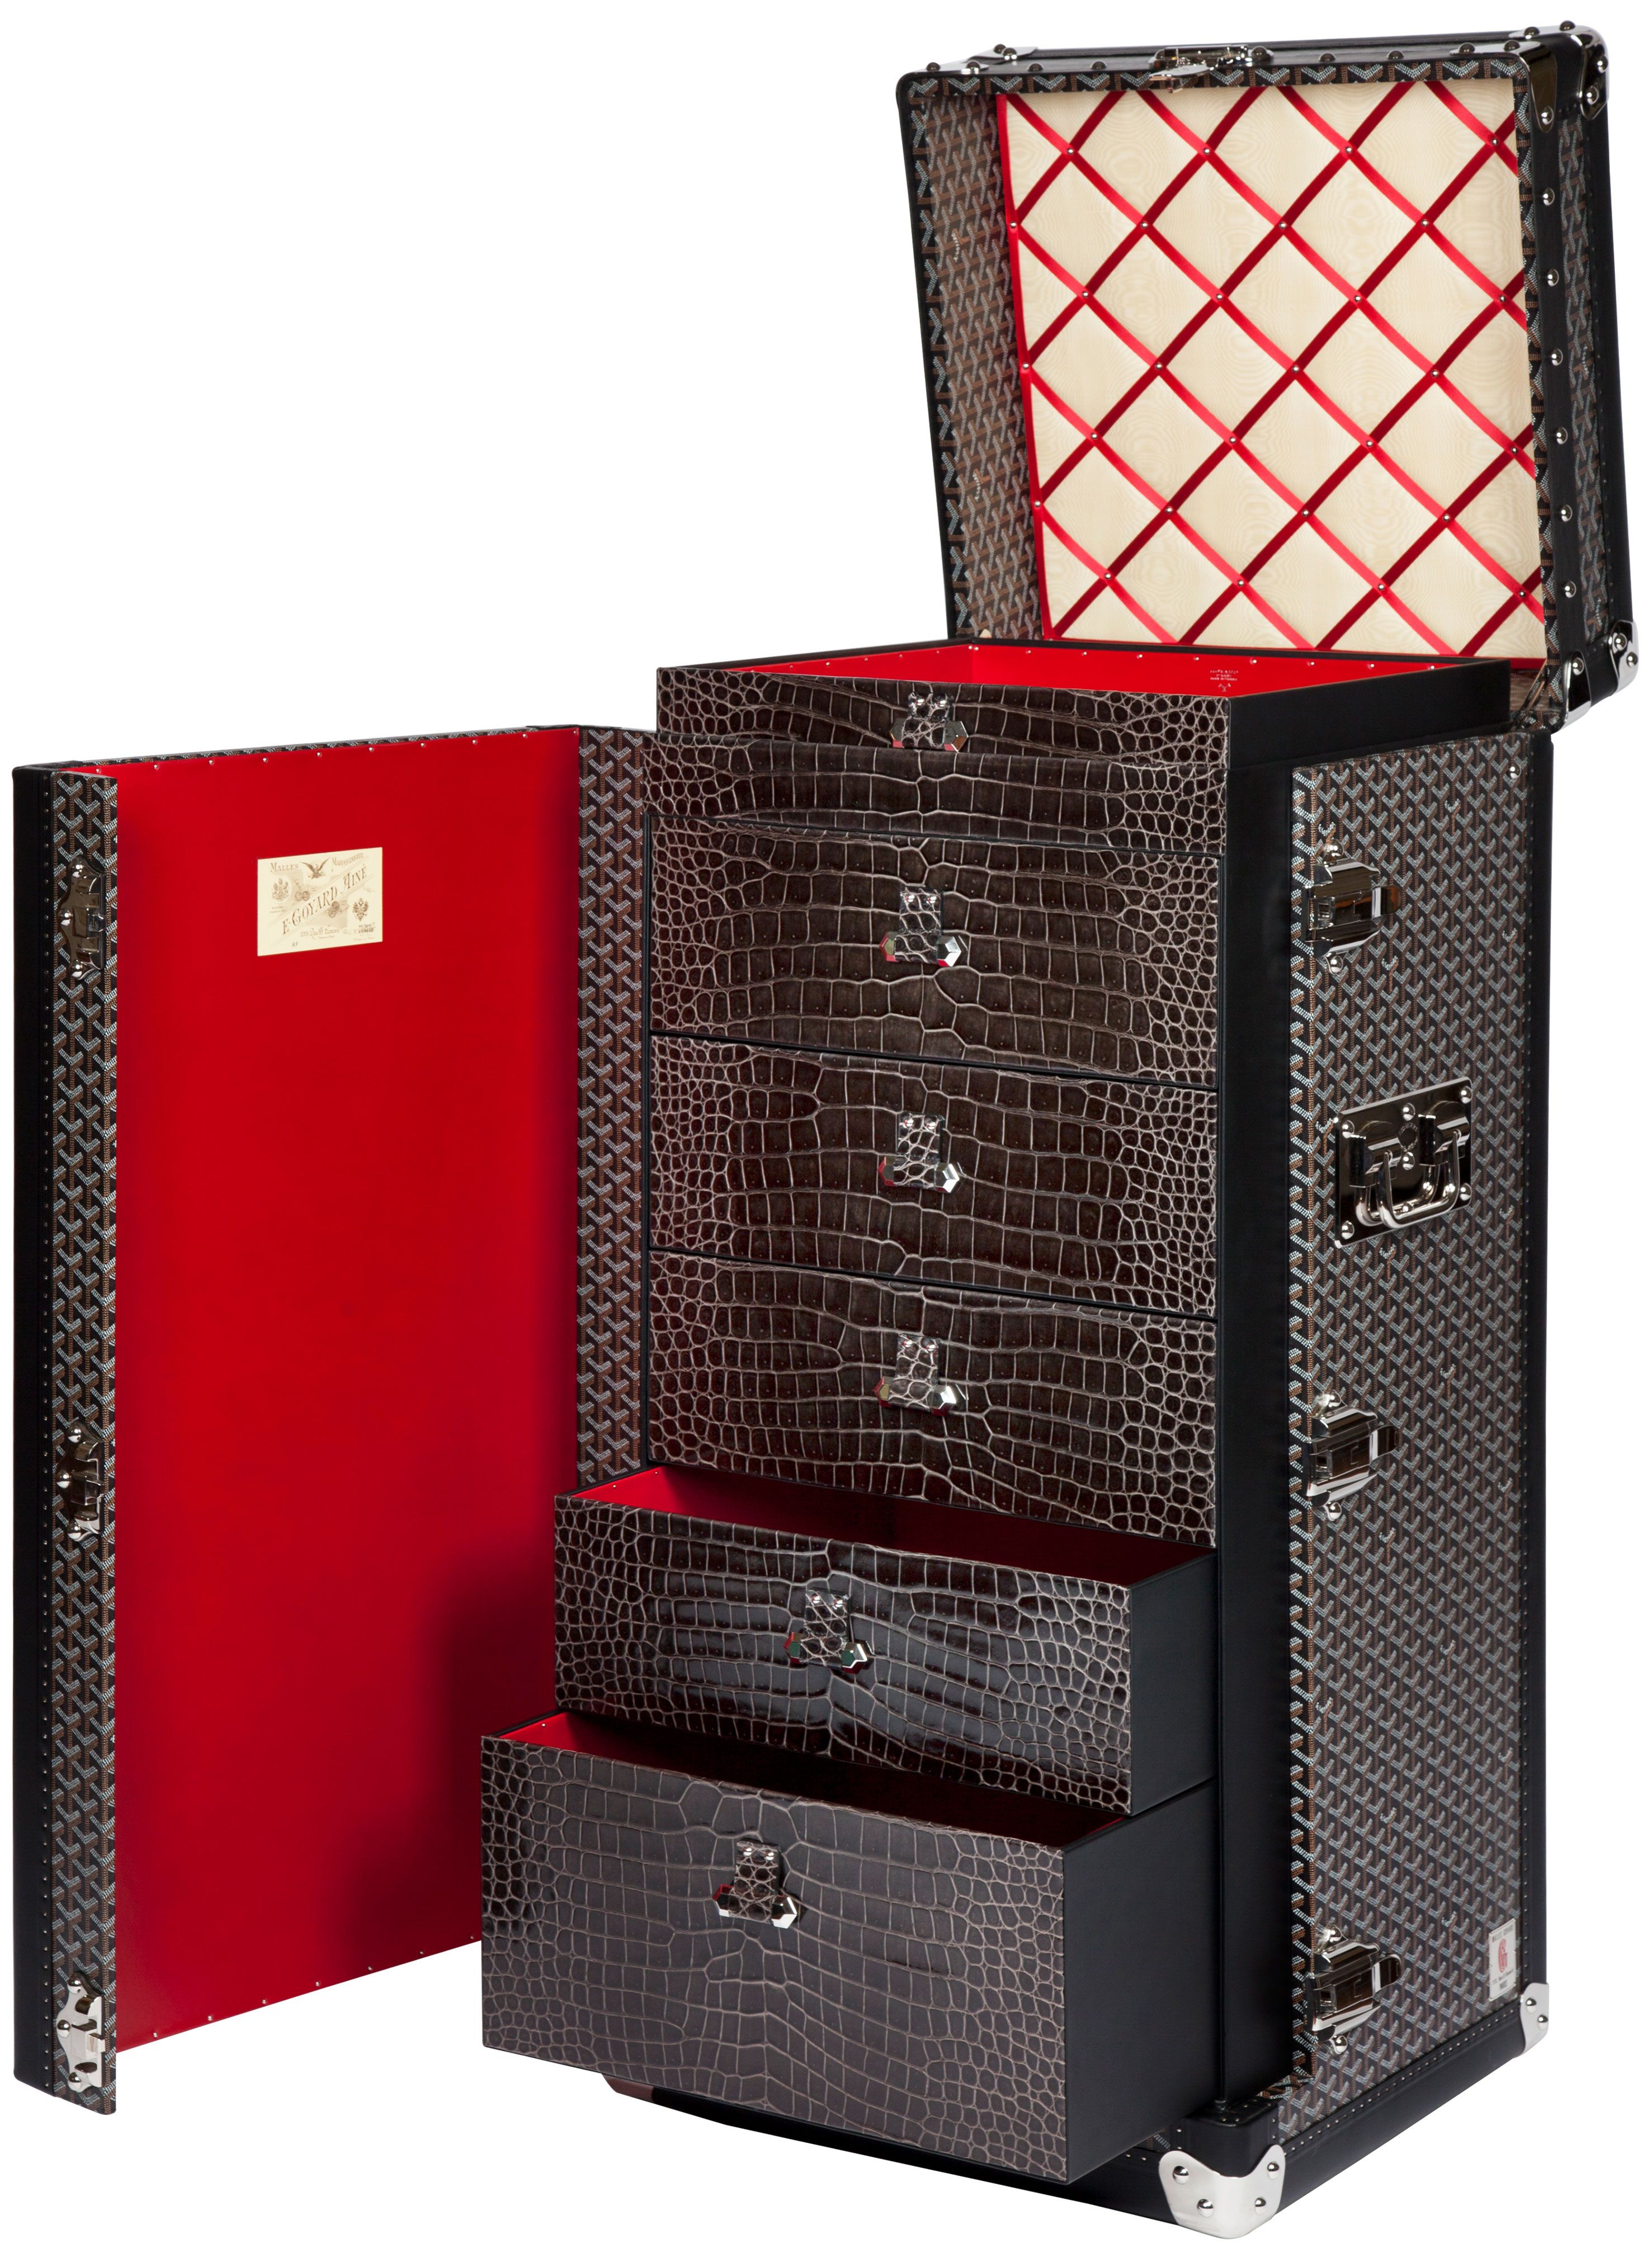 Luxury travel pairs perfectly with Goyard. Known for their incredible